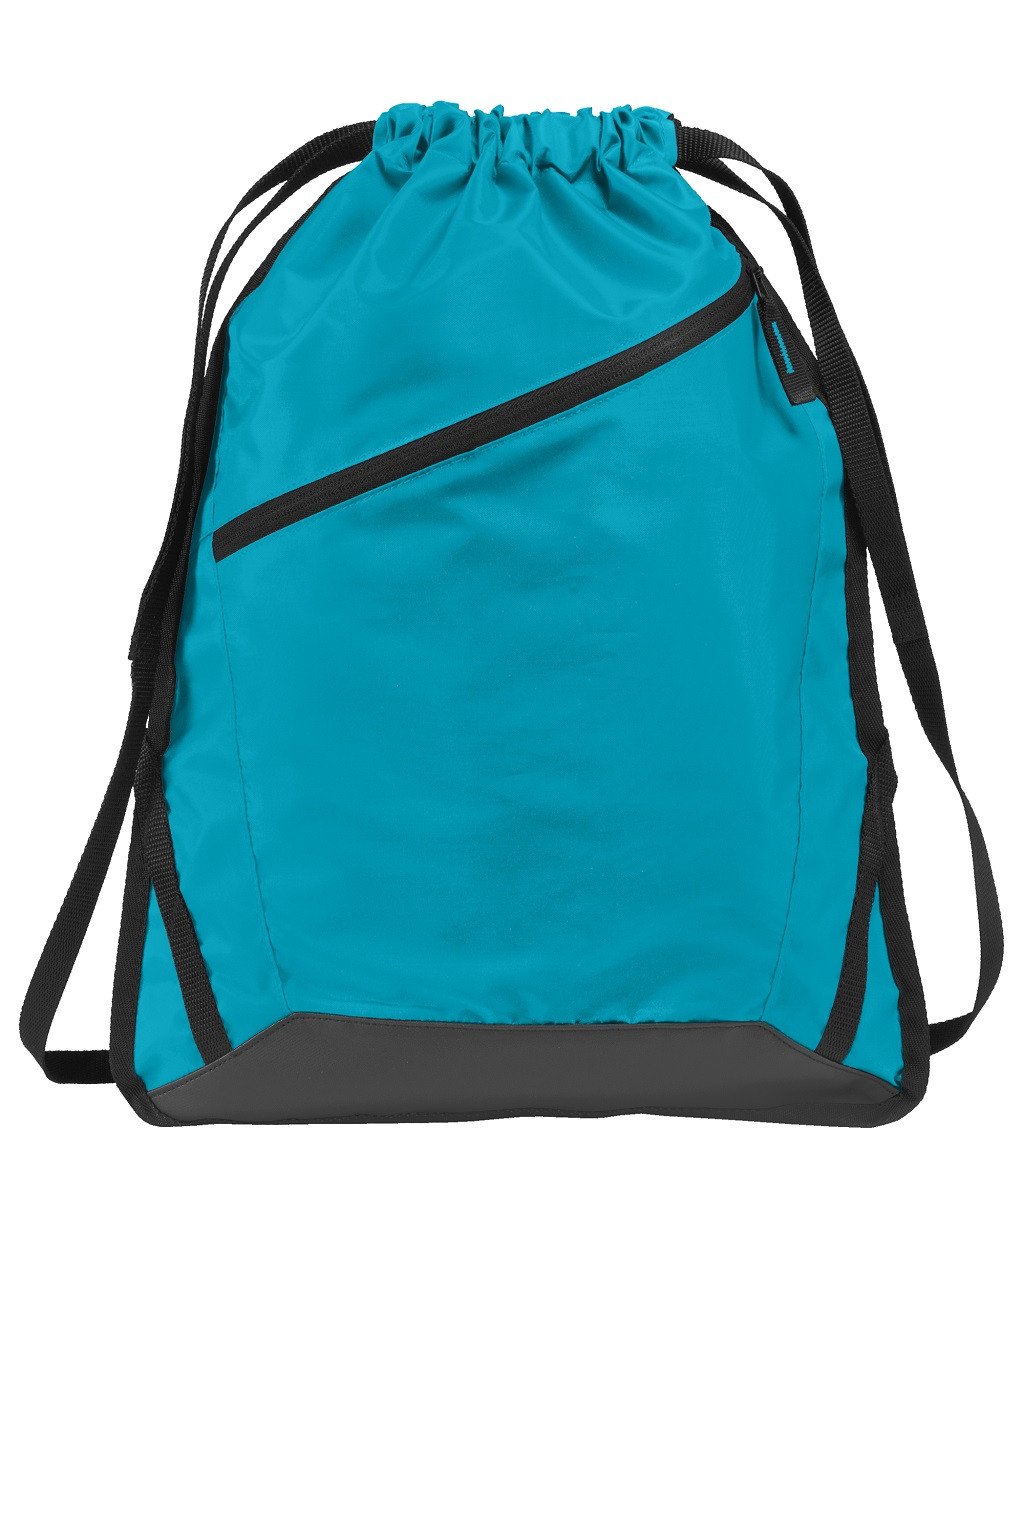 12 ct Zip-It Drawstring Backpack with Adjustable Straps - By Dozen